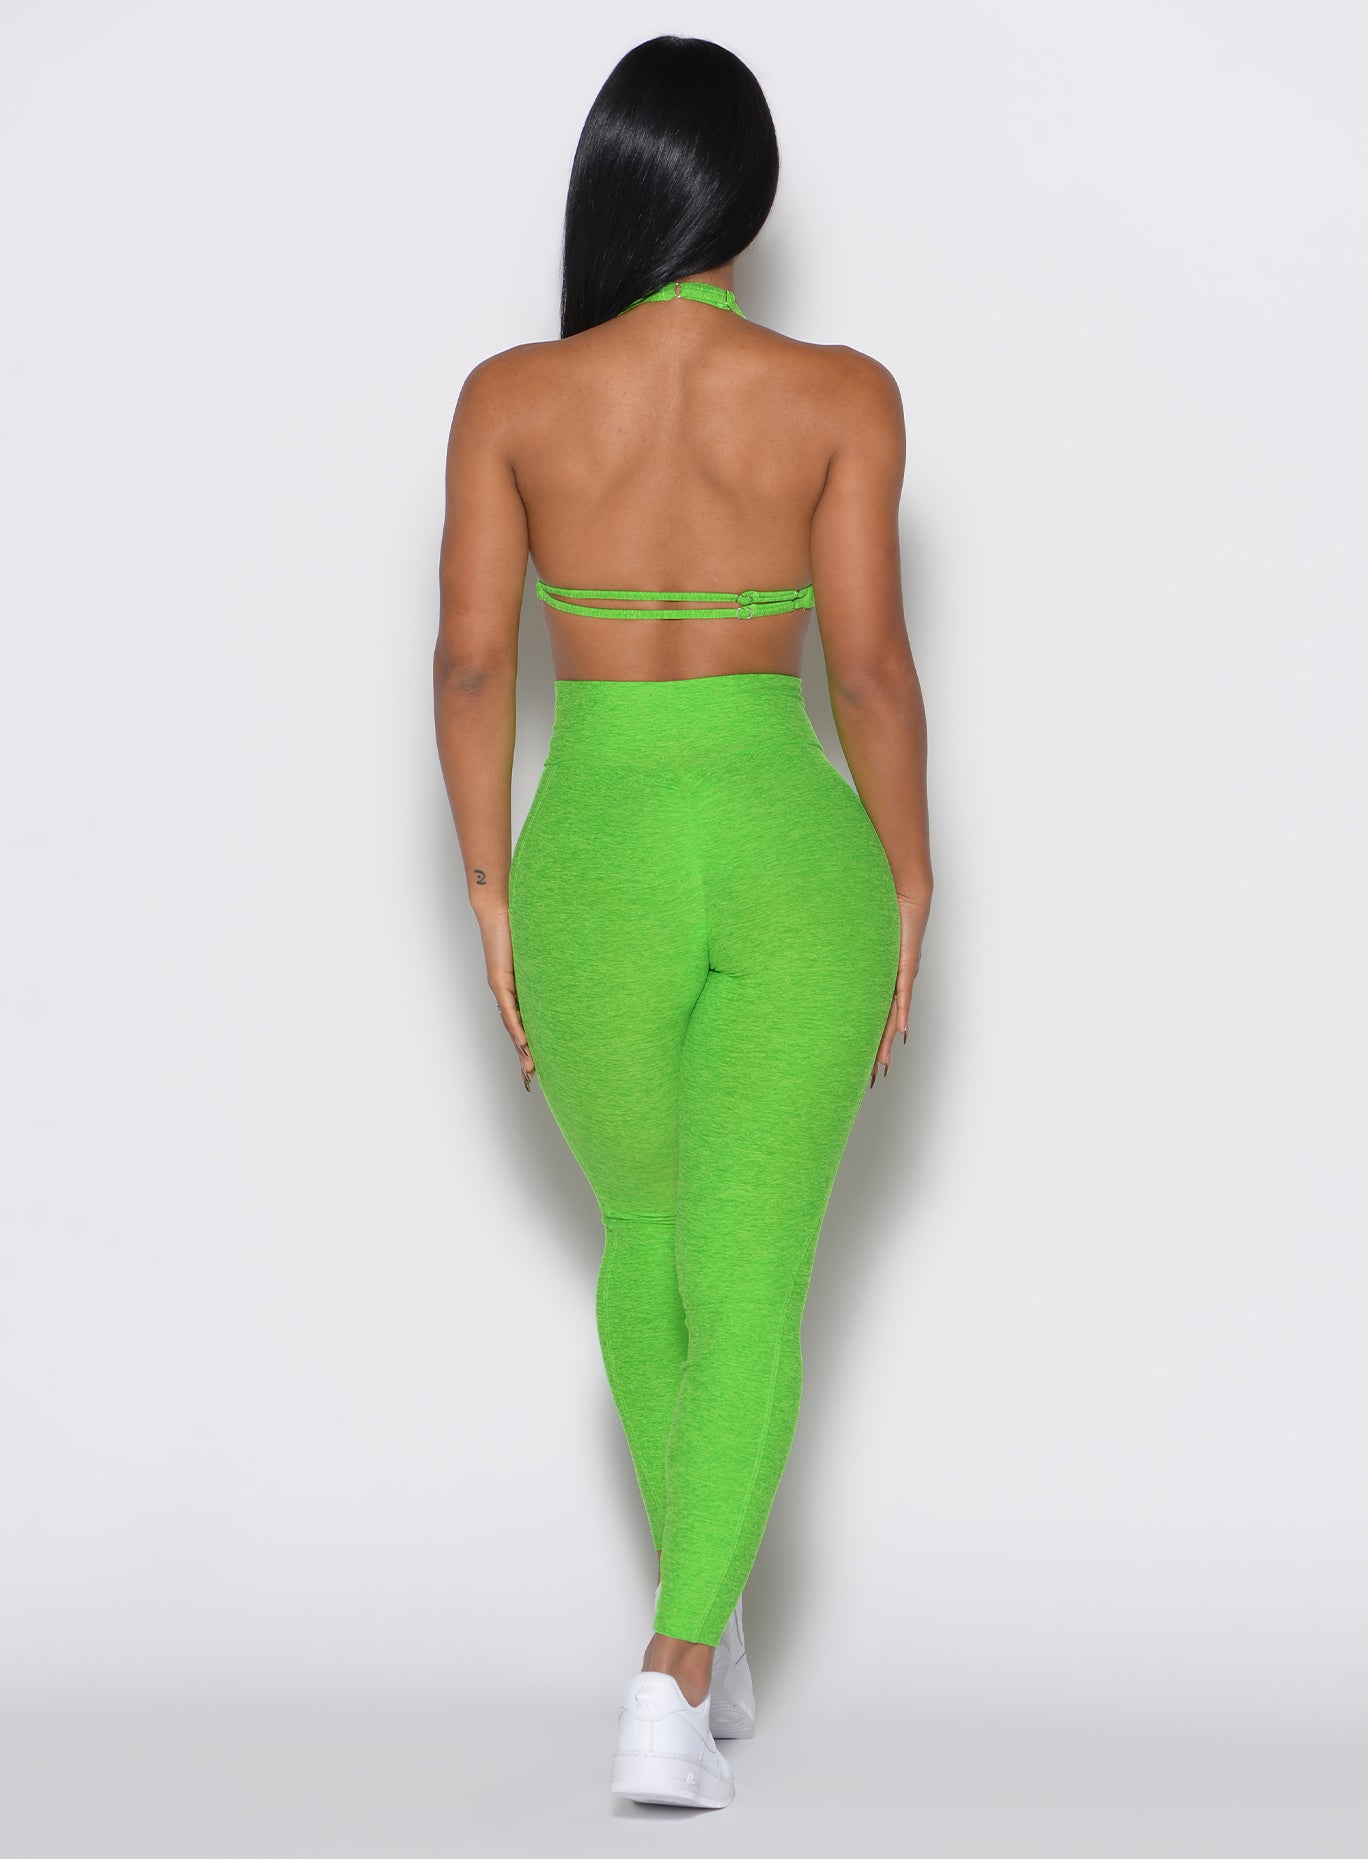 back profile view of a model wearing our curves leggings in Neon Lime Green color along with the matching sports bra